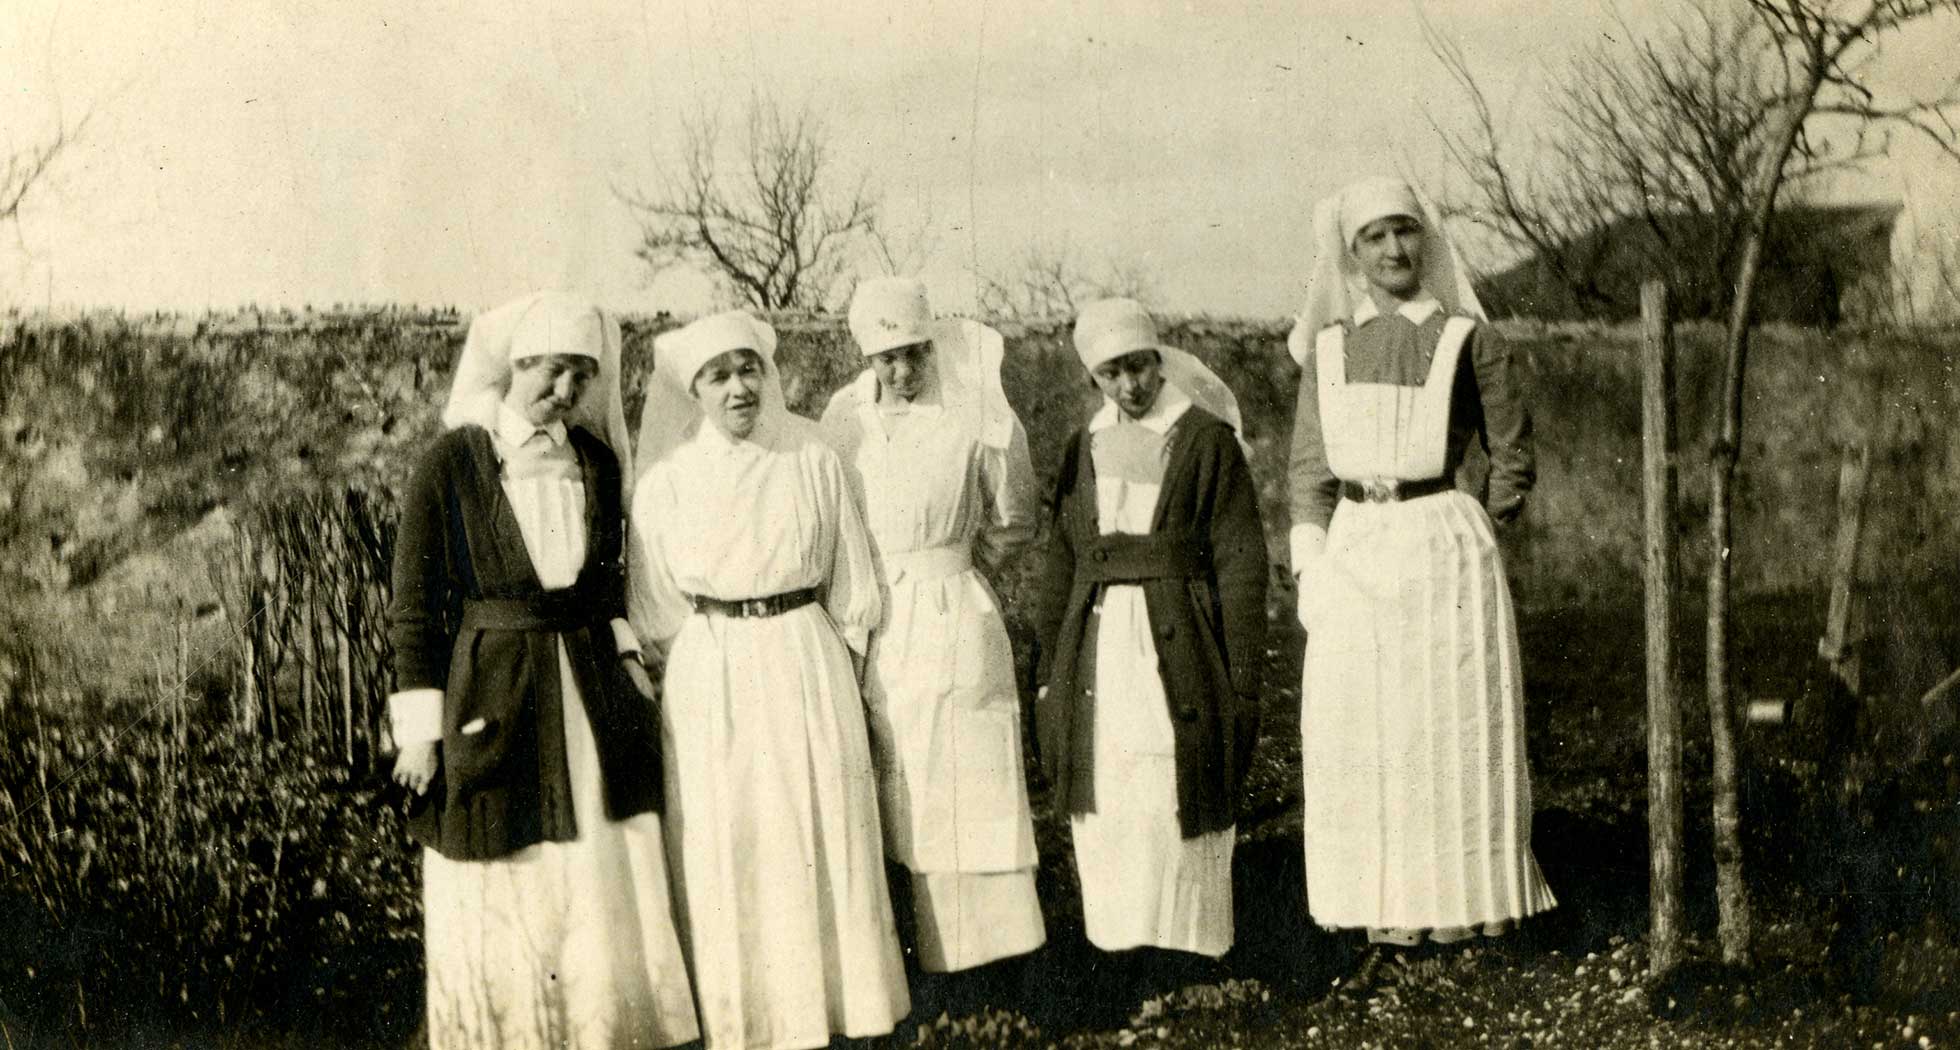 Black and white photograph of five nursing sisters in uniform standing outside in front of a wall.